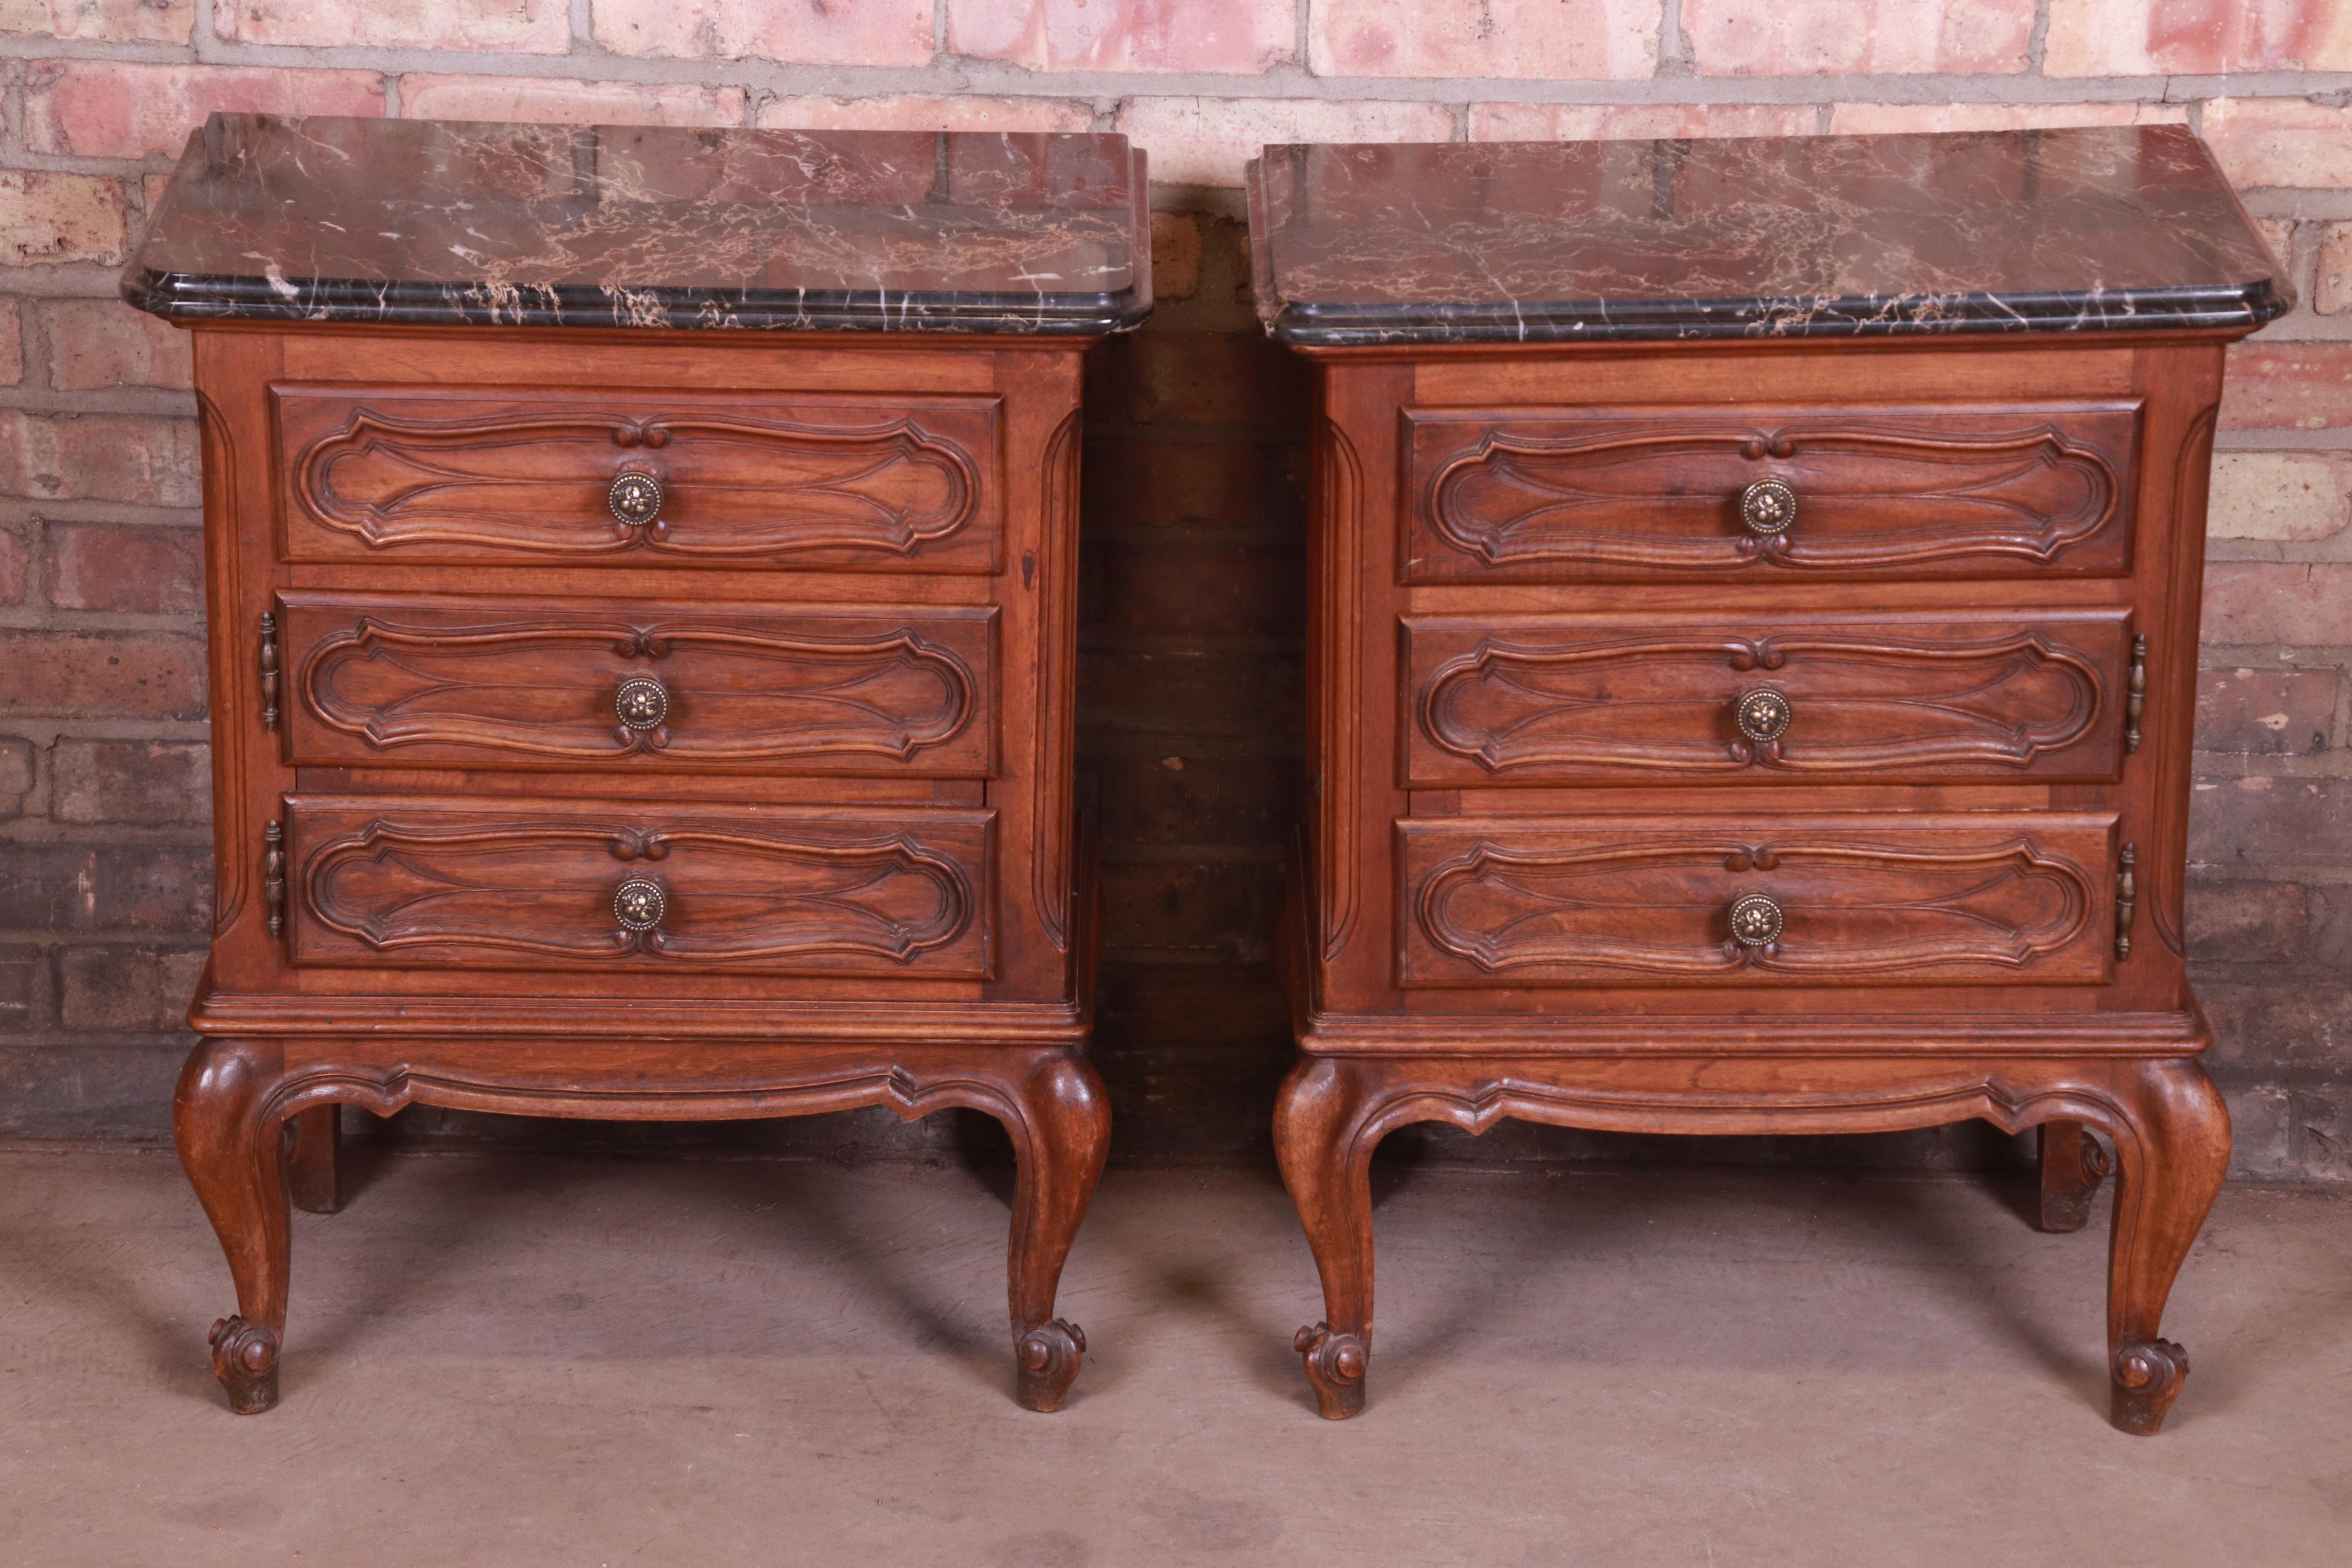 20th Century Mobili Barovero Italian Provincial Carved Walnut Marble Top Nightstands, Pair